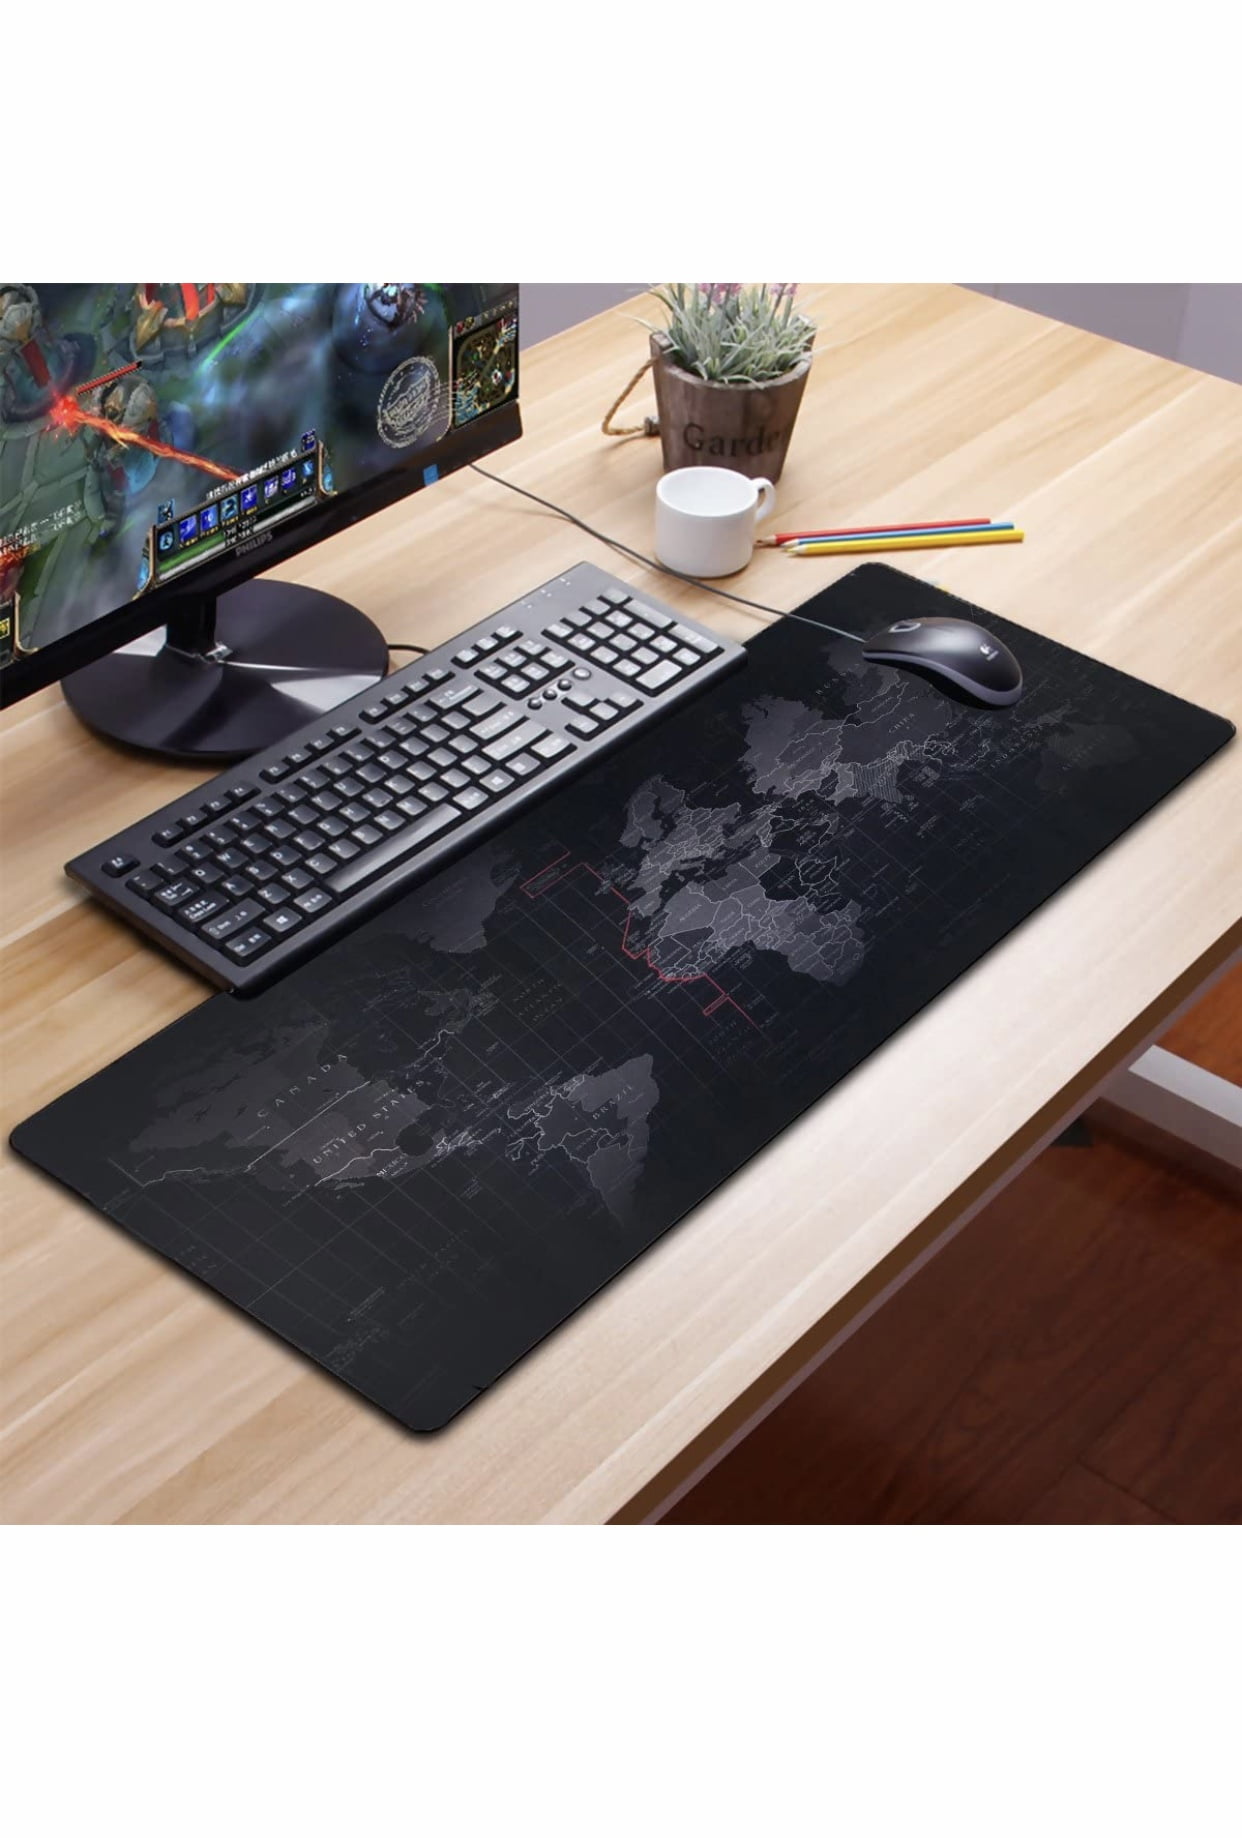 Large World Map Gaming Mouse Pad Office Desk Laptop Computer Keyboard Mice Mat 